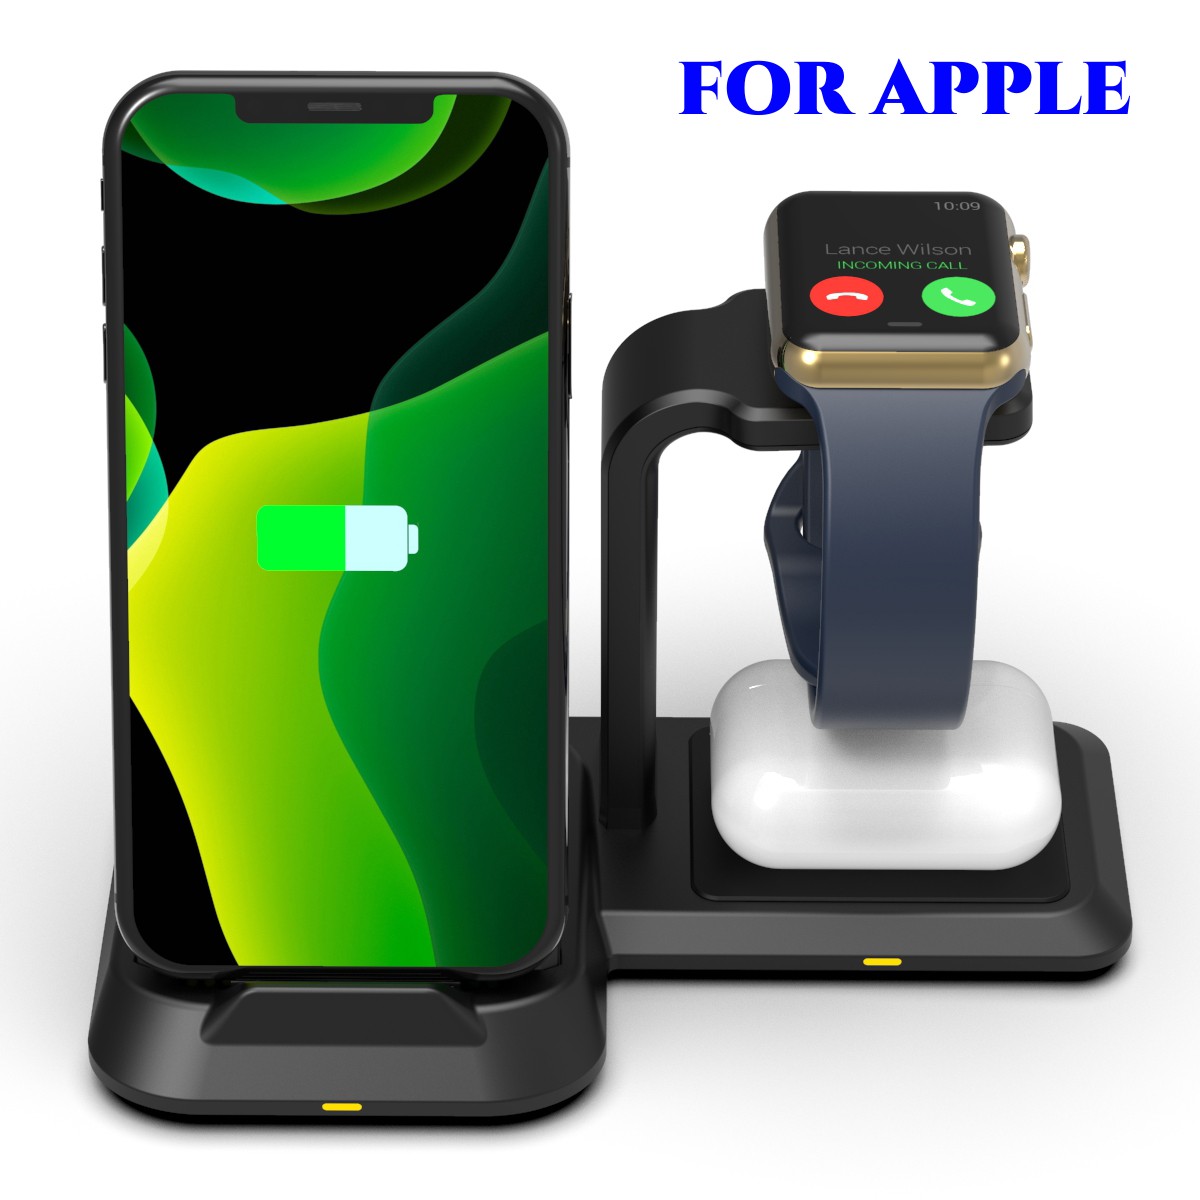 30W 3 in 1 Wireless Charger Dock Station for iPhone 12 13 iWatch 7 Airpods Pro Samsung S22 S21 Galaxy Watch 4 Auds Fast Chargers (for Apple Black)